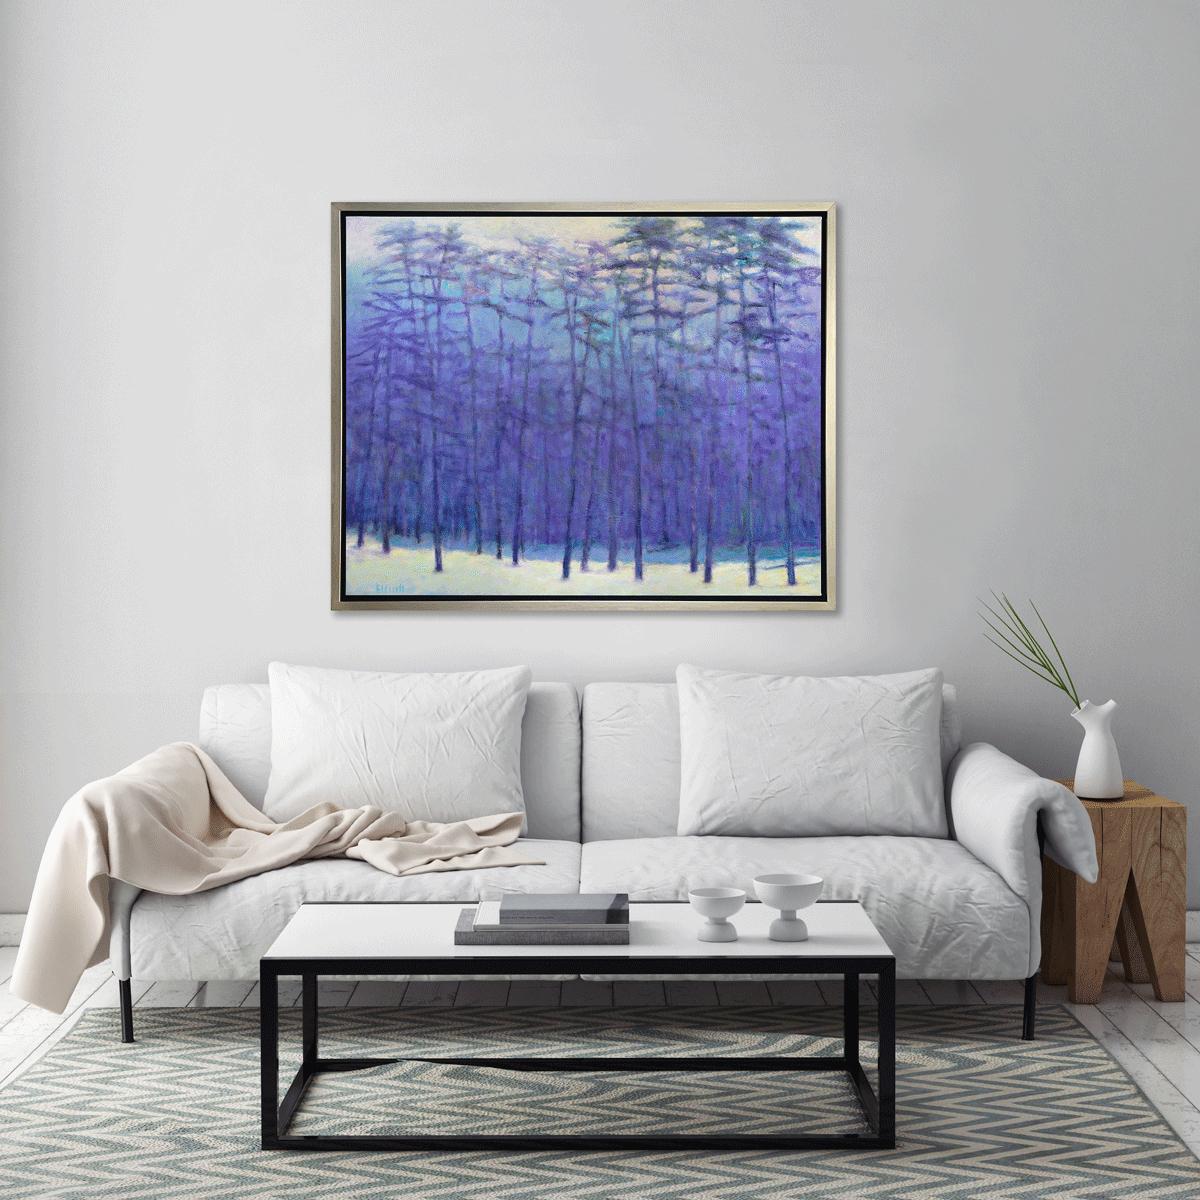 This abstract landscape limited edition print by Ken Elliott features a cool violet-blue palette, capturing an abstracted scene of a forest in the winter. The trees are depicted in shades of deep blue, with a snowy white forest floor. 

This Limited